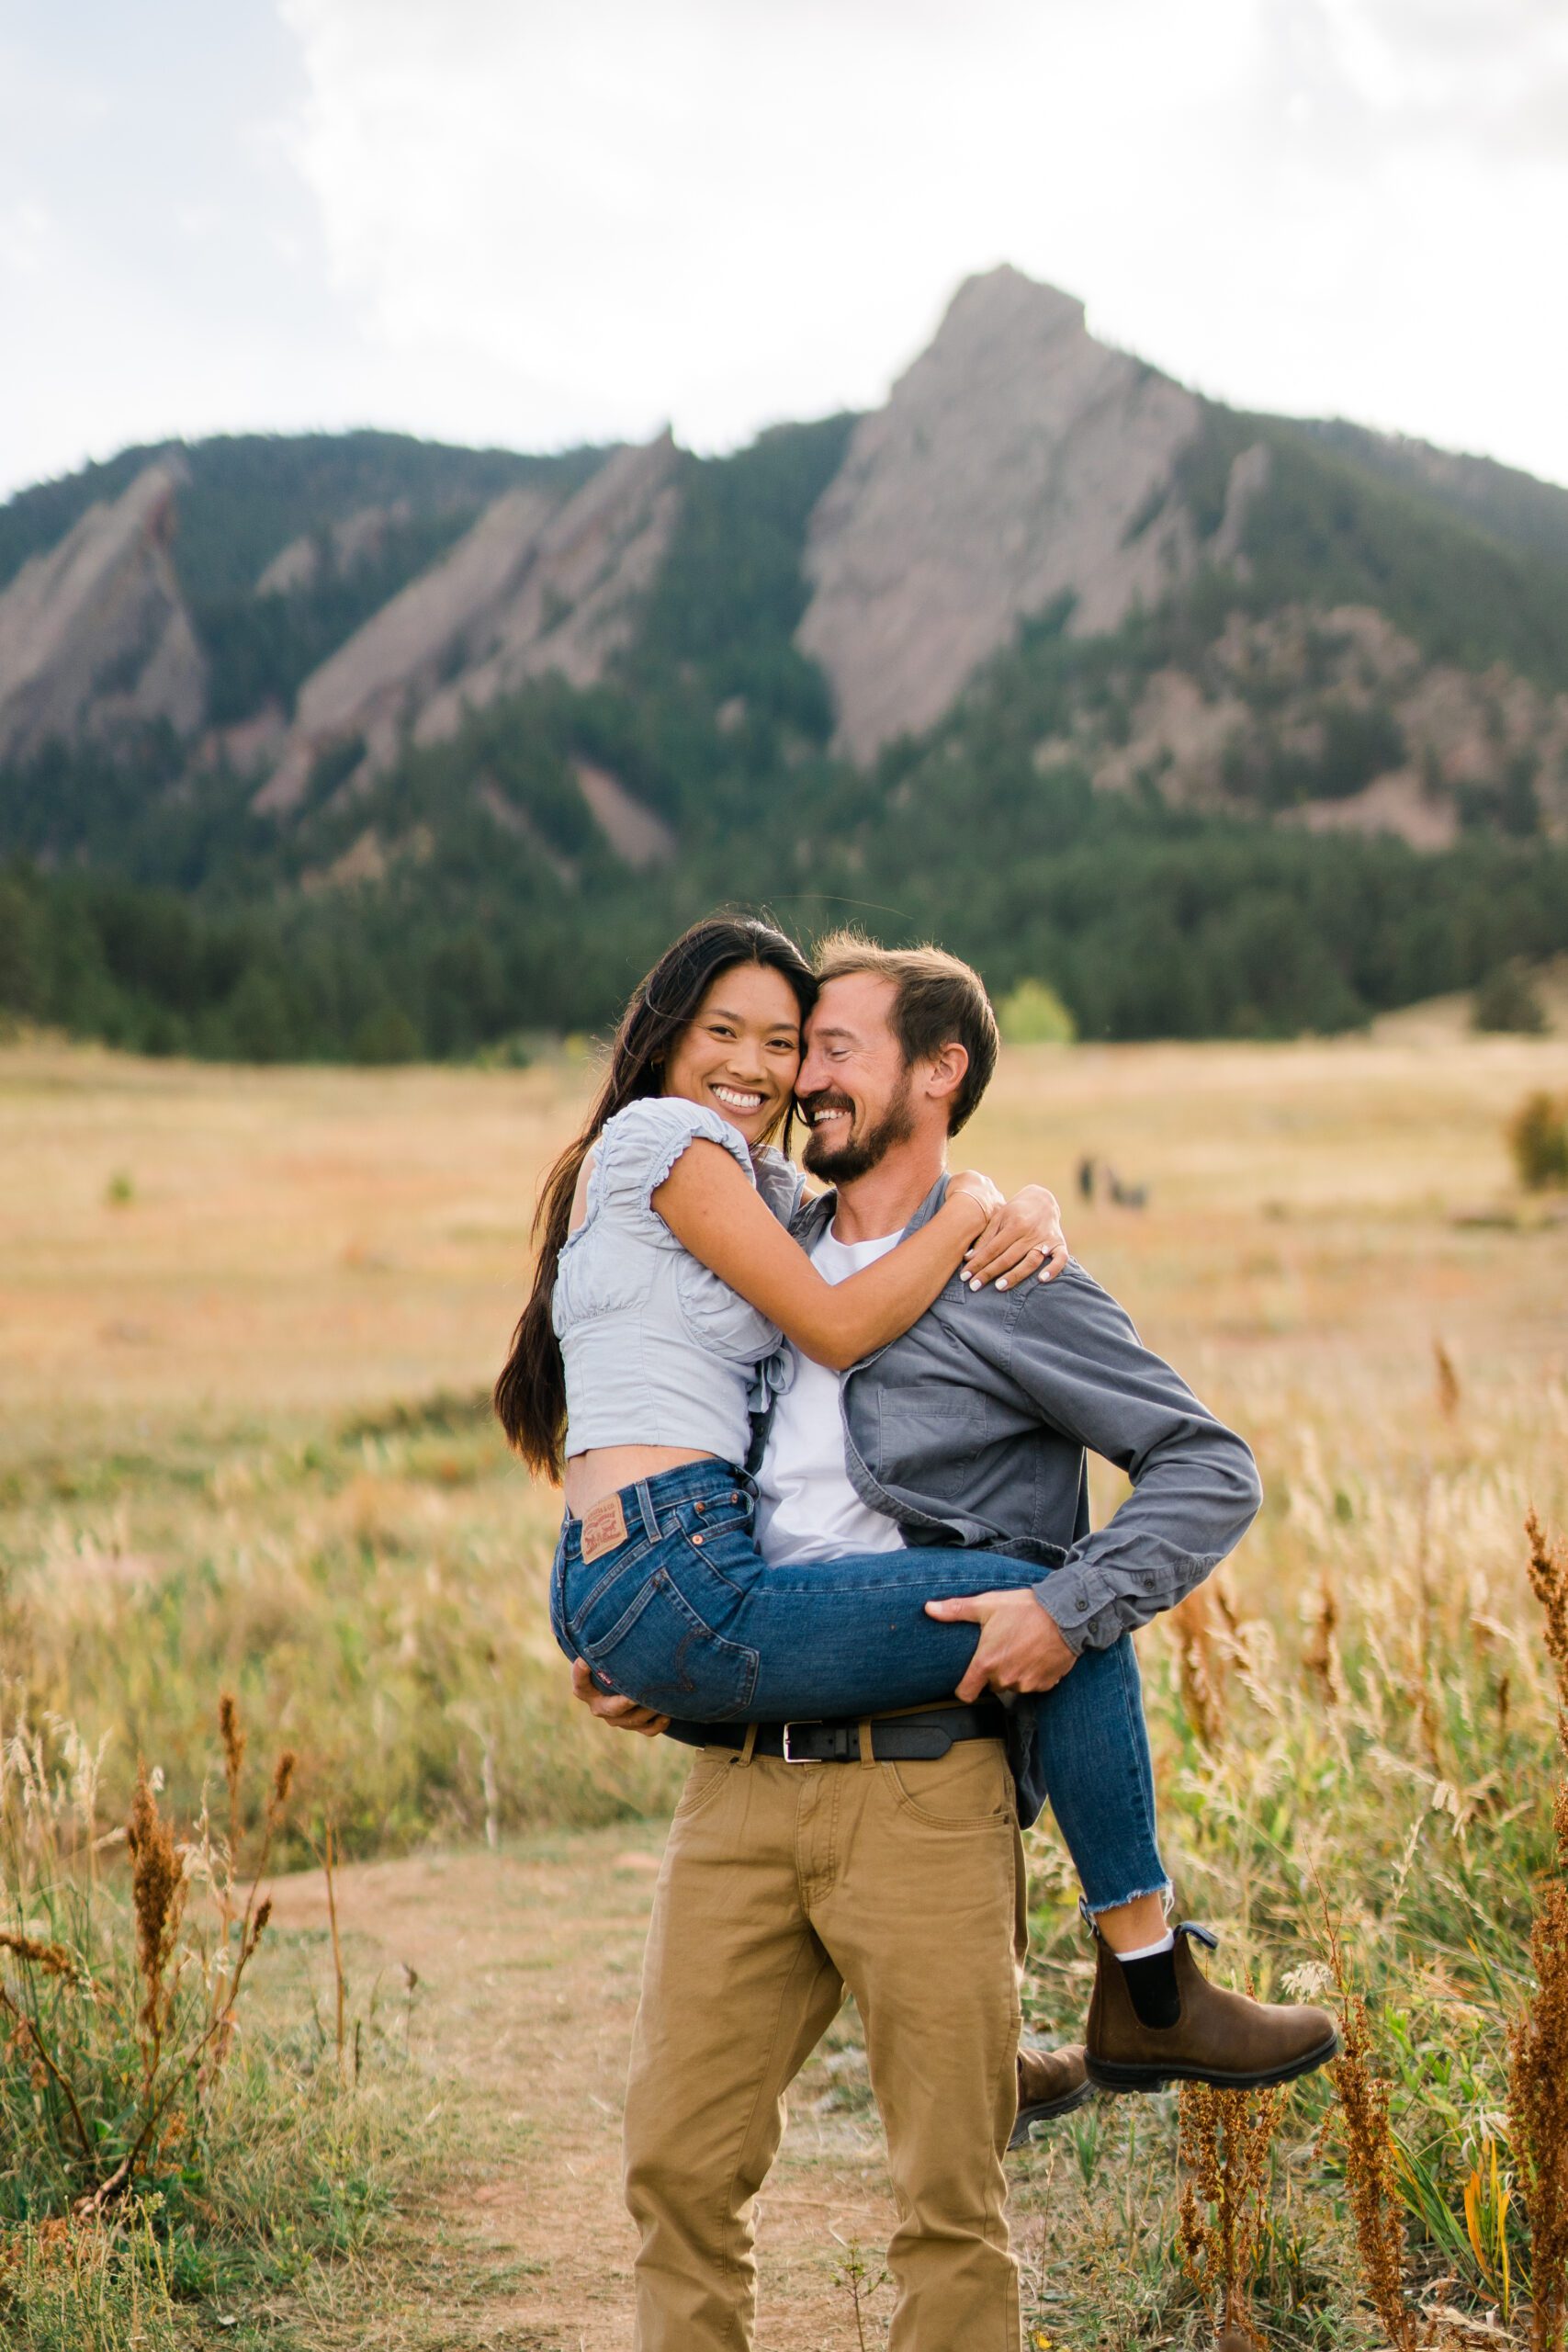 finacee holding on to her fiance during their Chautauqua park engagement photos in boulder Colorado